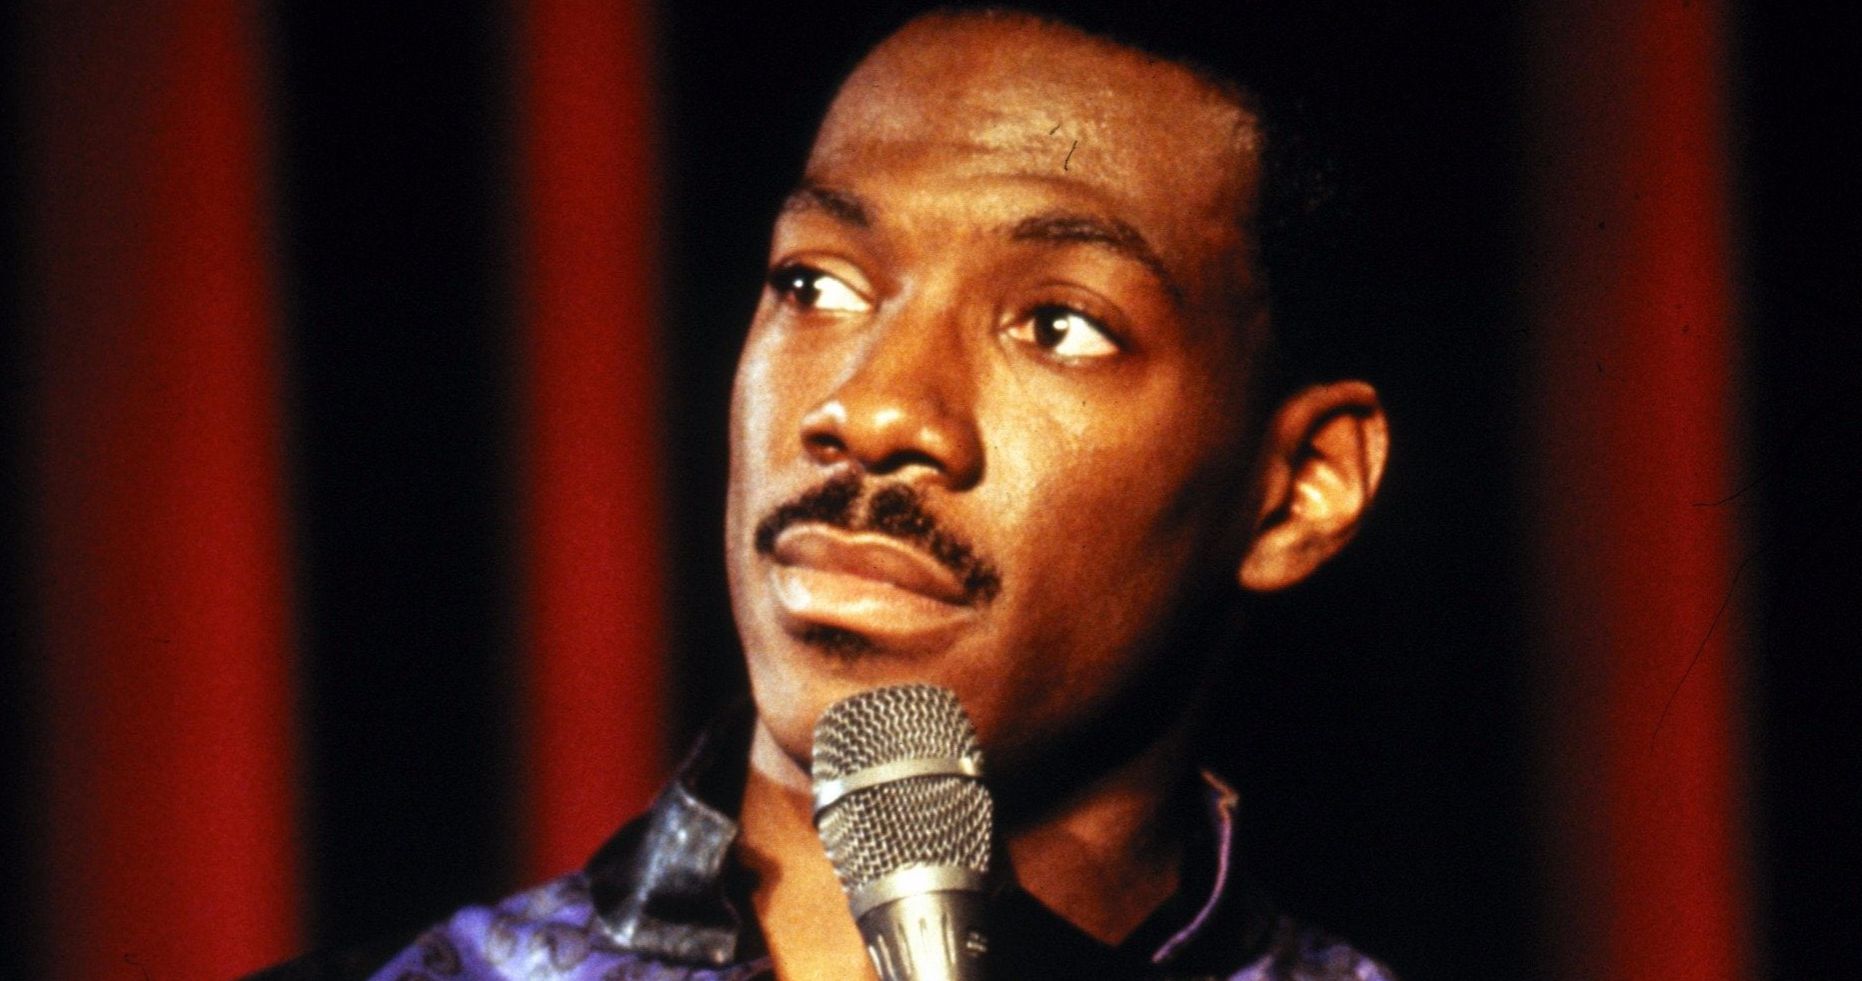 Eddie Murphy Confirms He'll Return to Standup Comedy in 2020